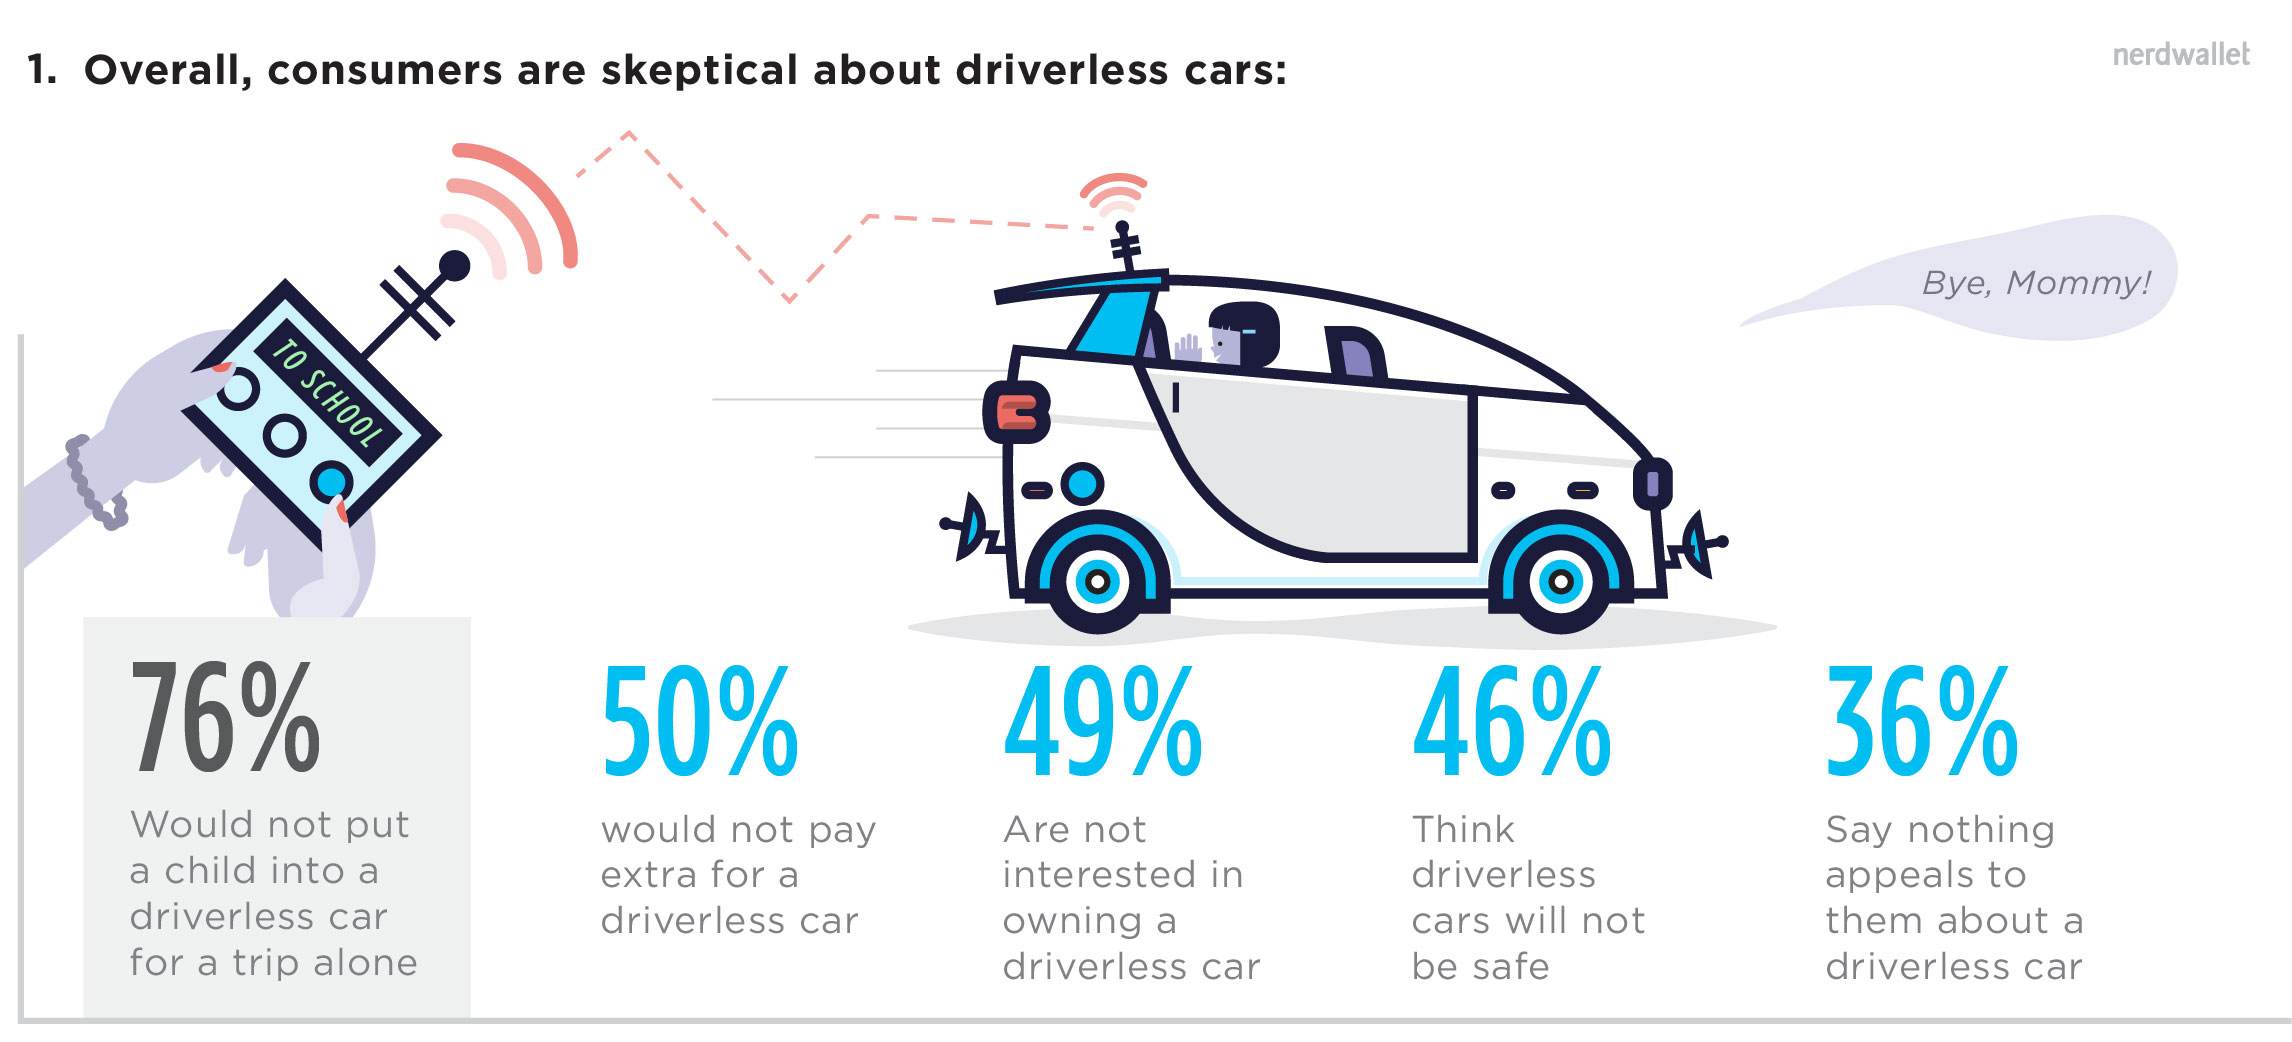 Consumers Are Skeptical About Driverless Cars